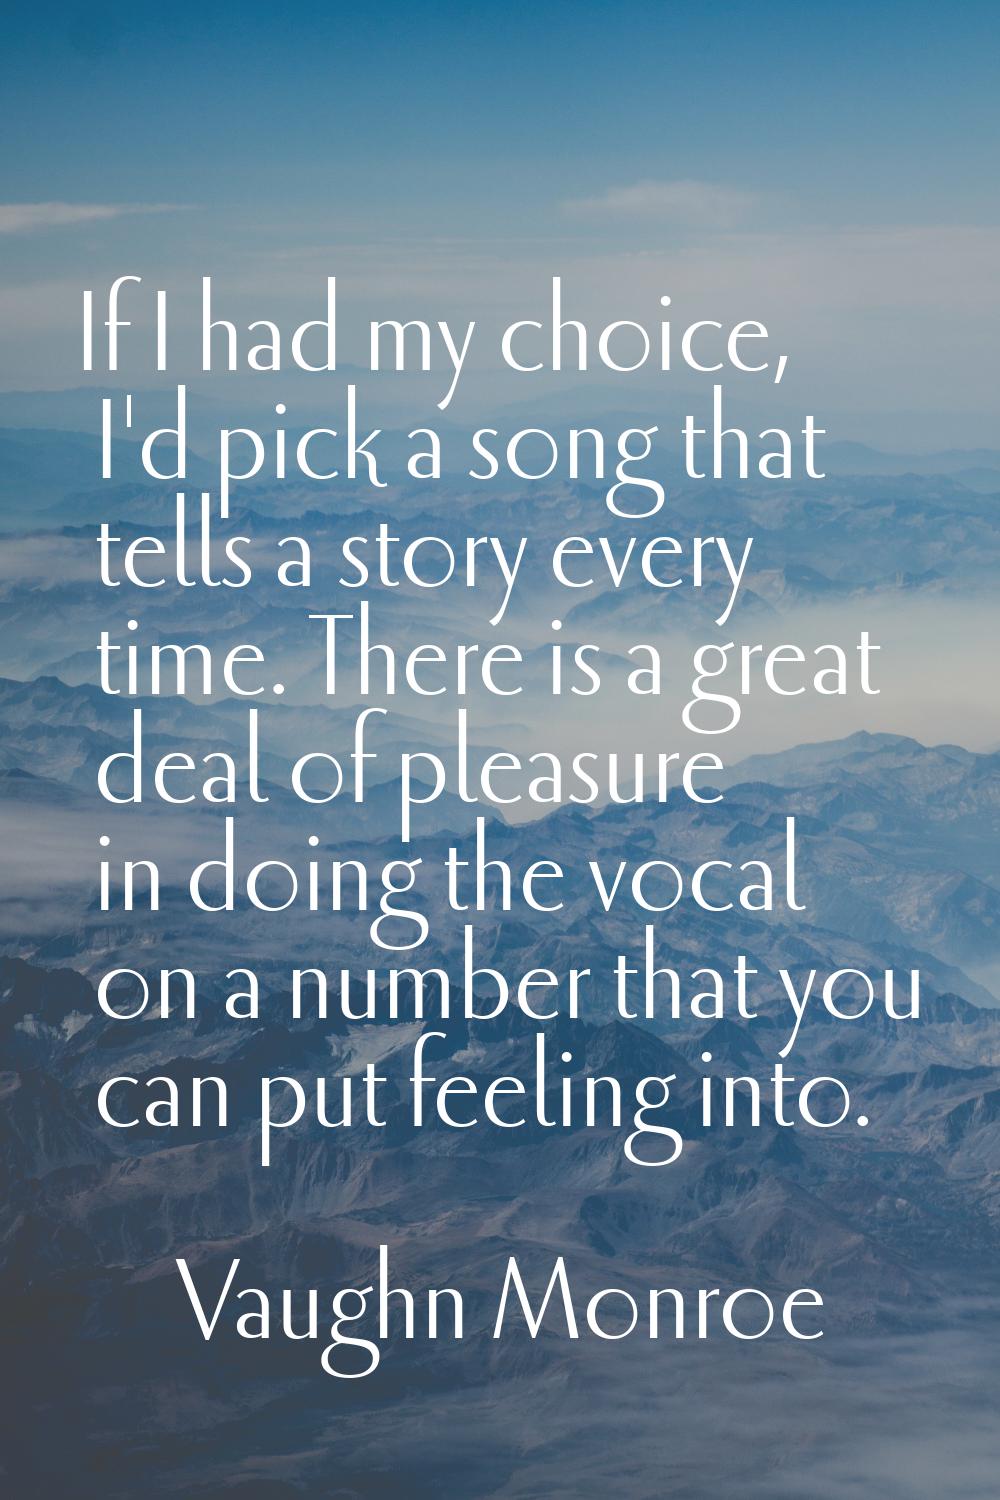 If I had my choice, I'd pick a song that tells a story every time. There is a great deal of pleasur